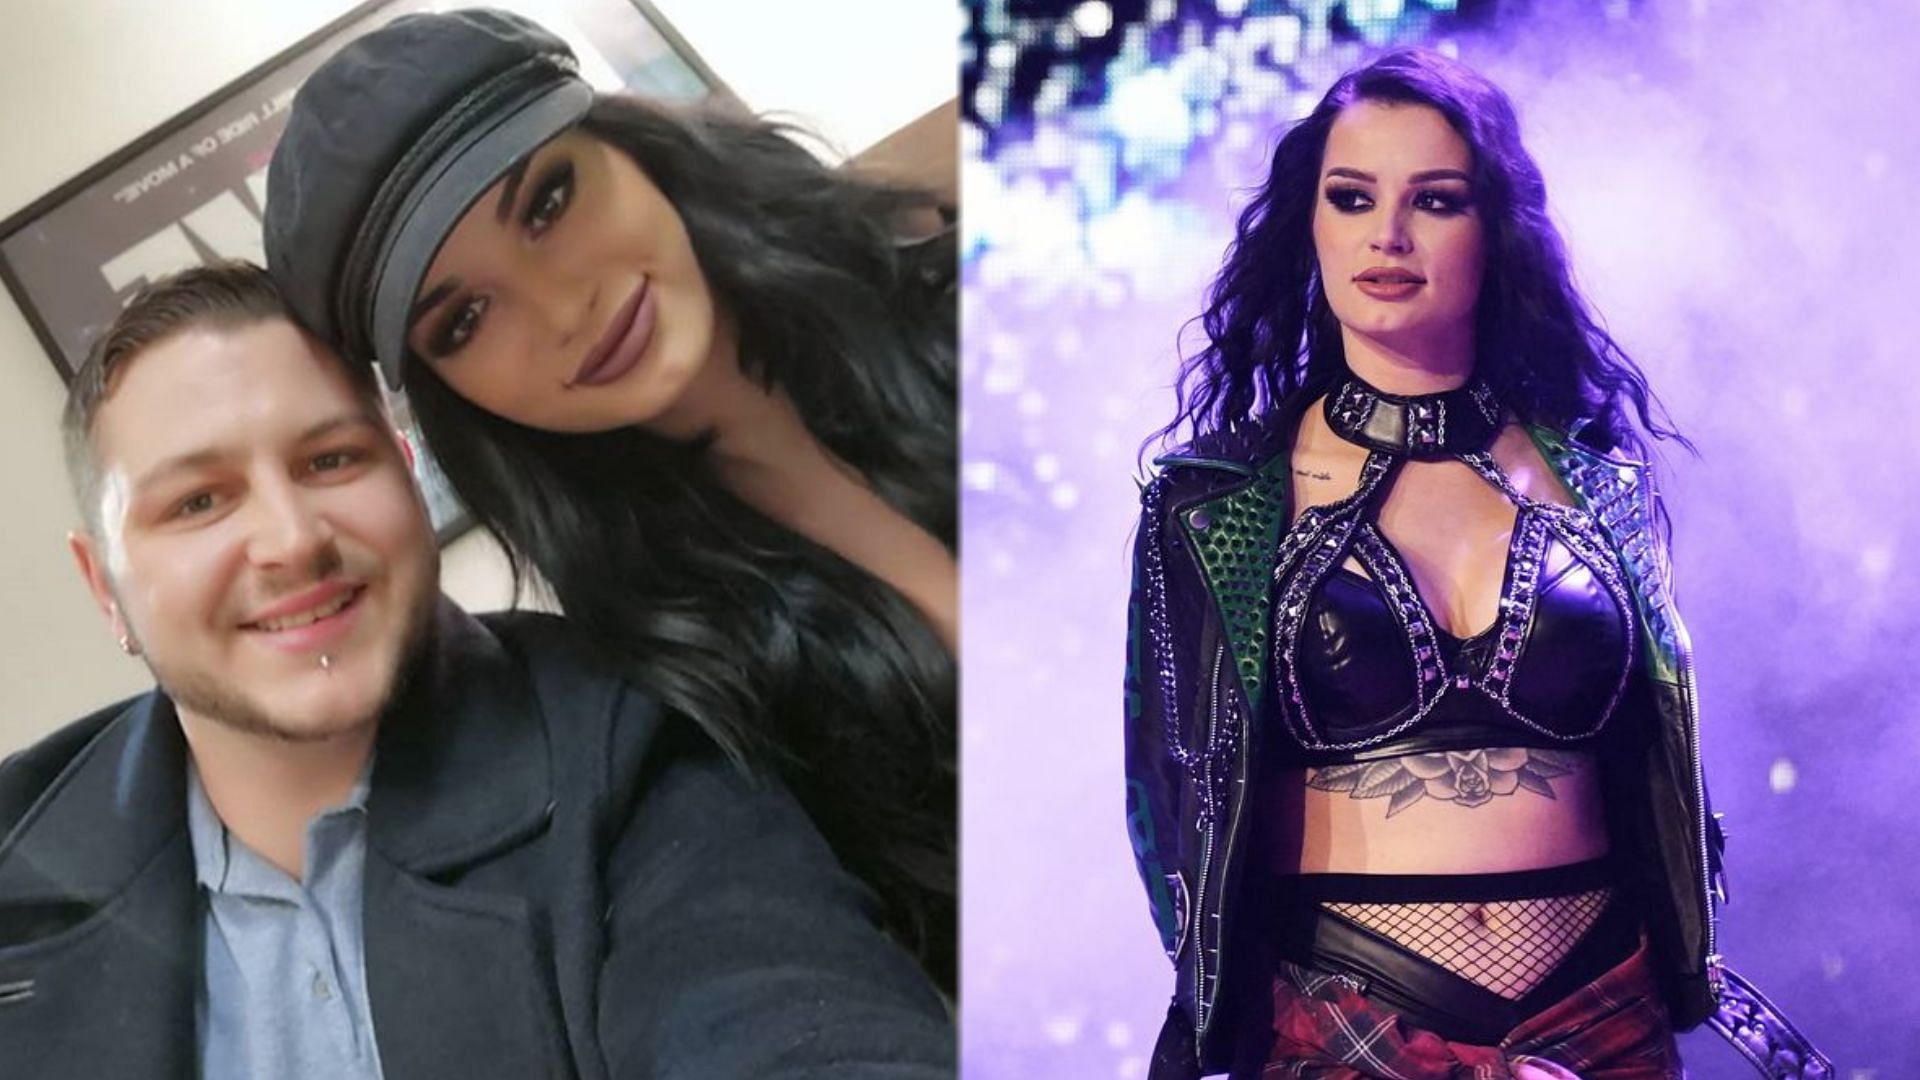 Could Saraya and her brother finally reunite in AEW?